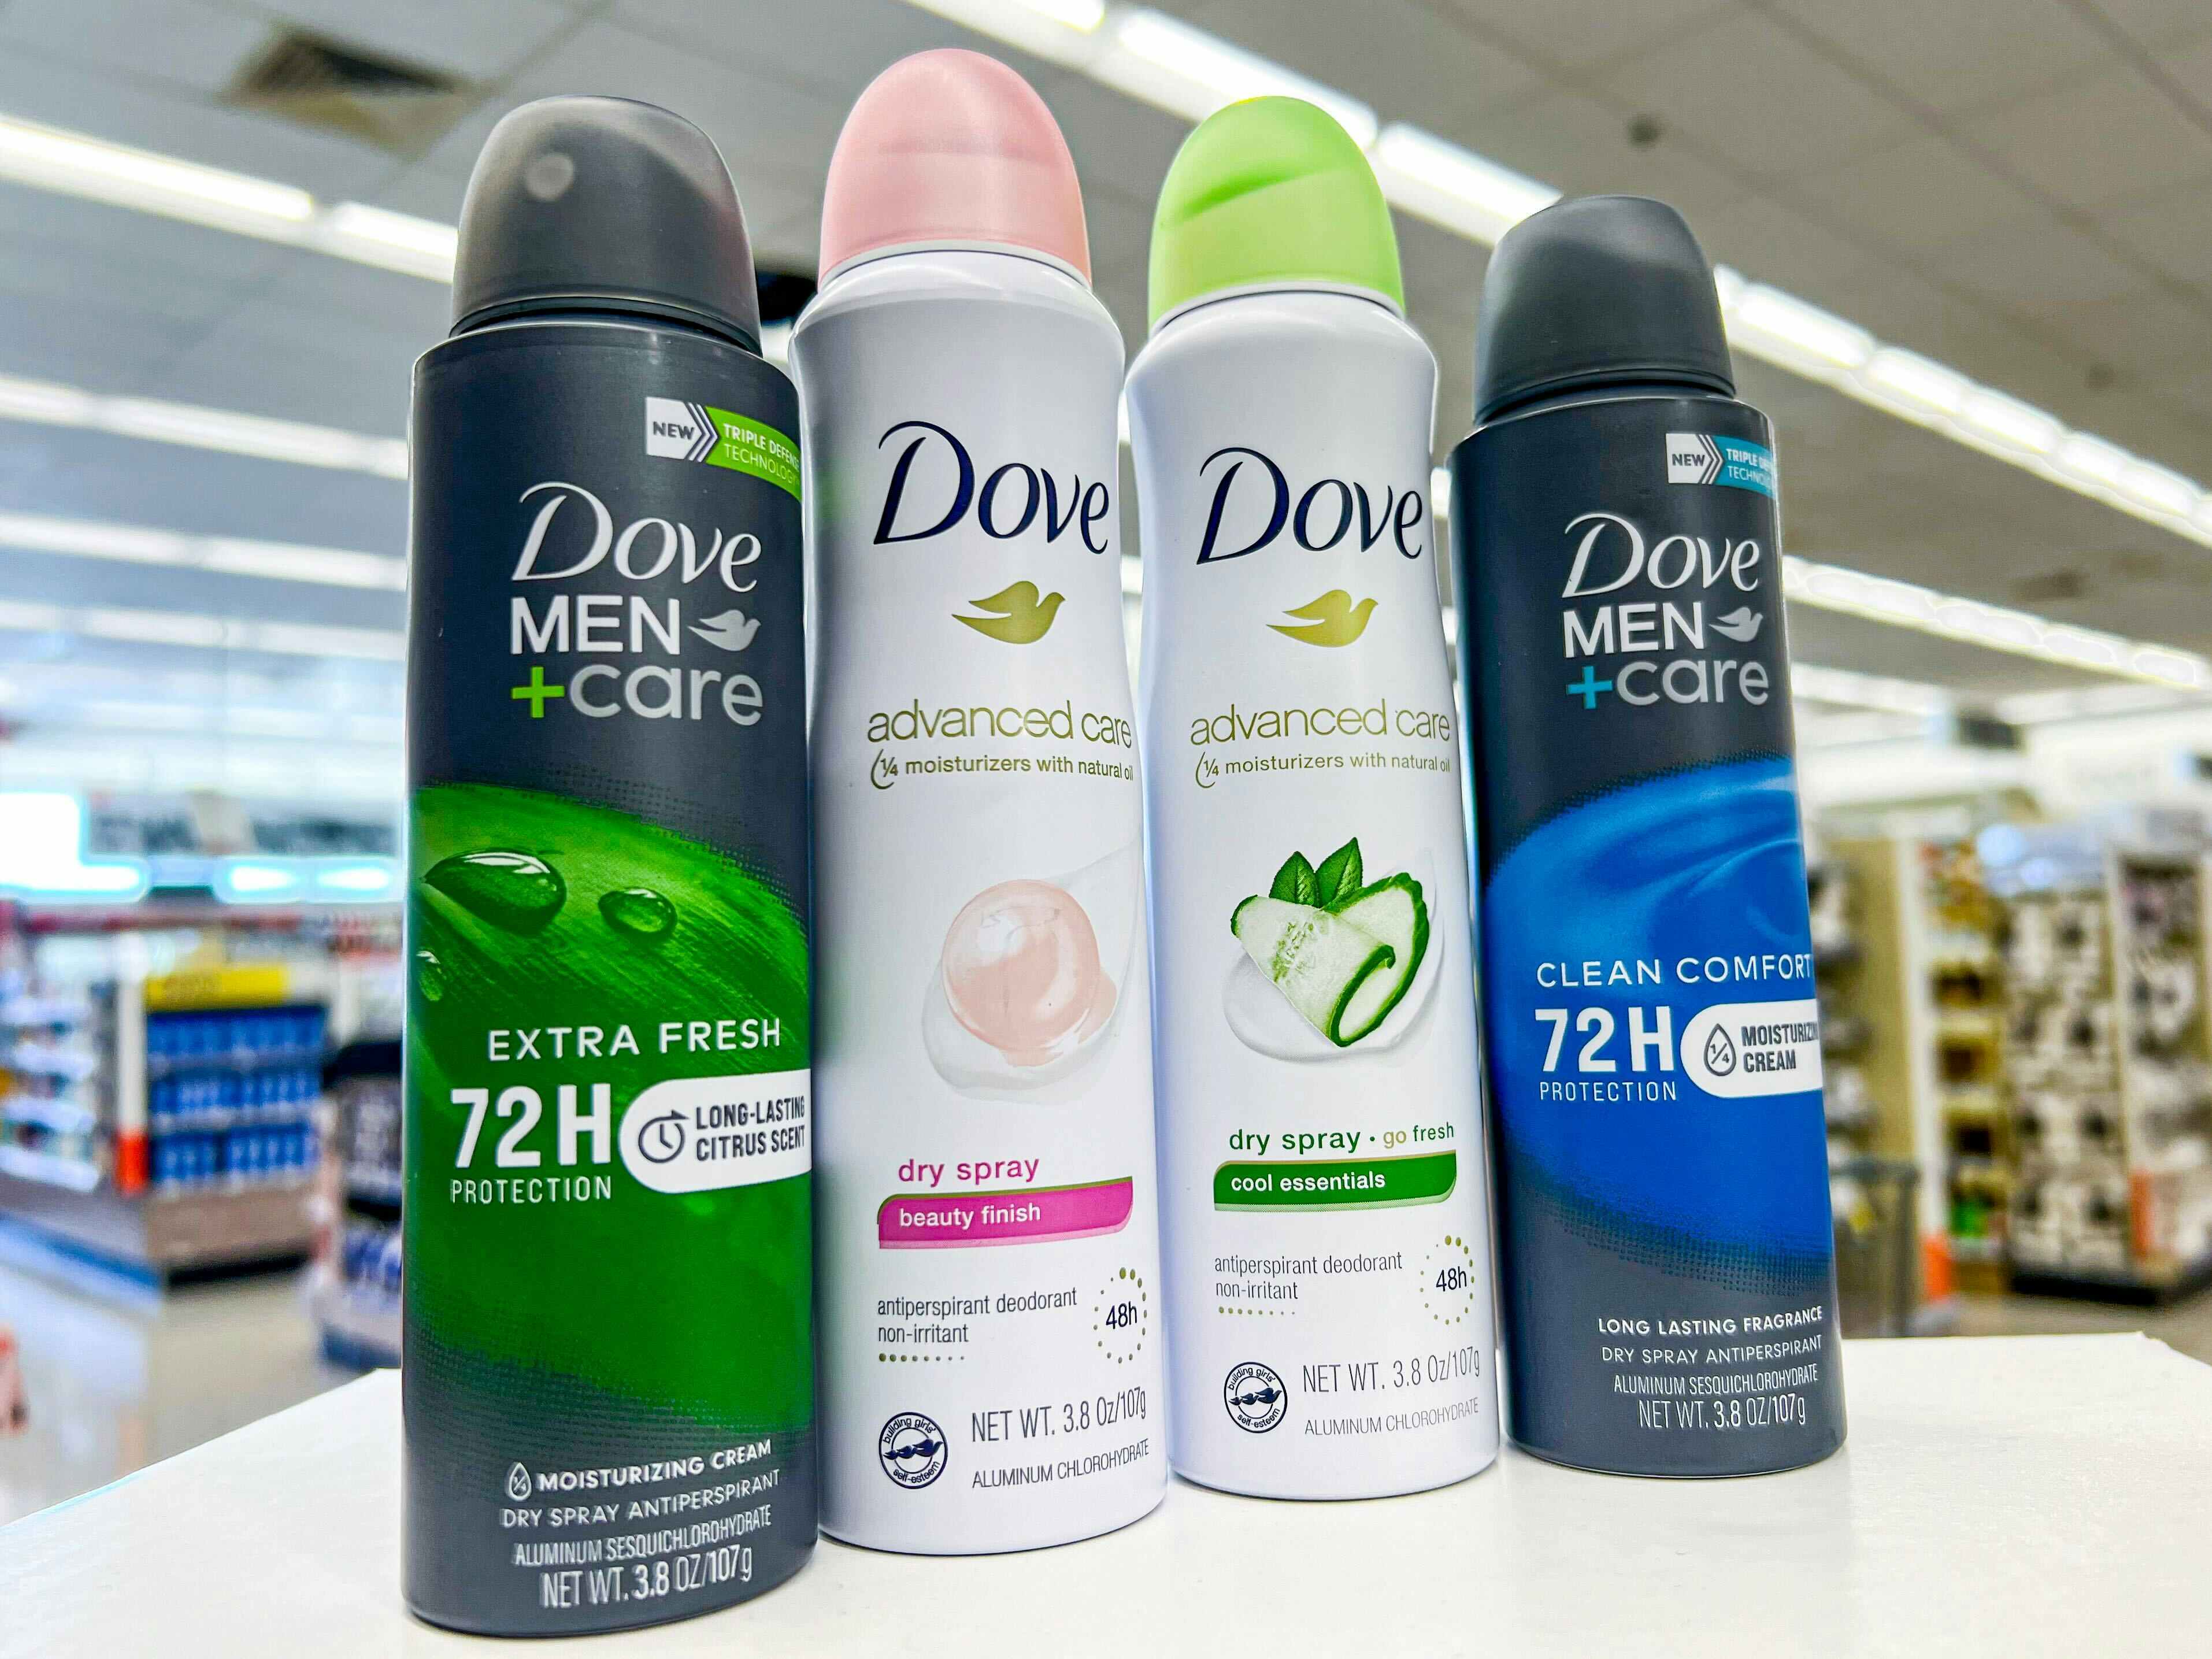 Save 60% on Dove and Dove Men+Care Dry Sprays at CVS